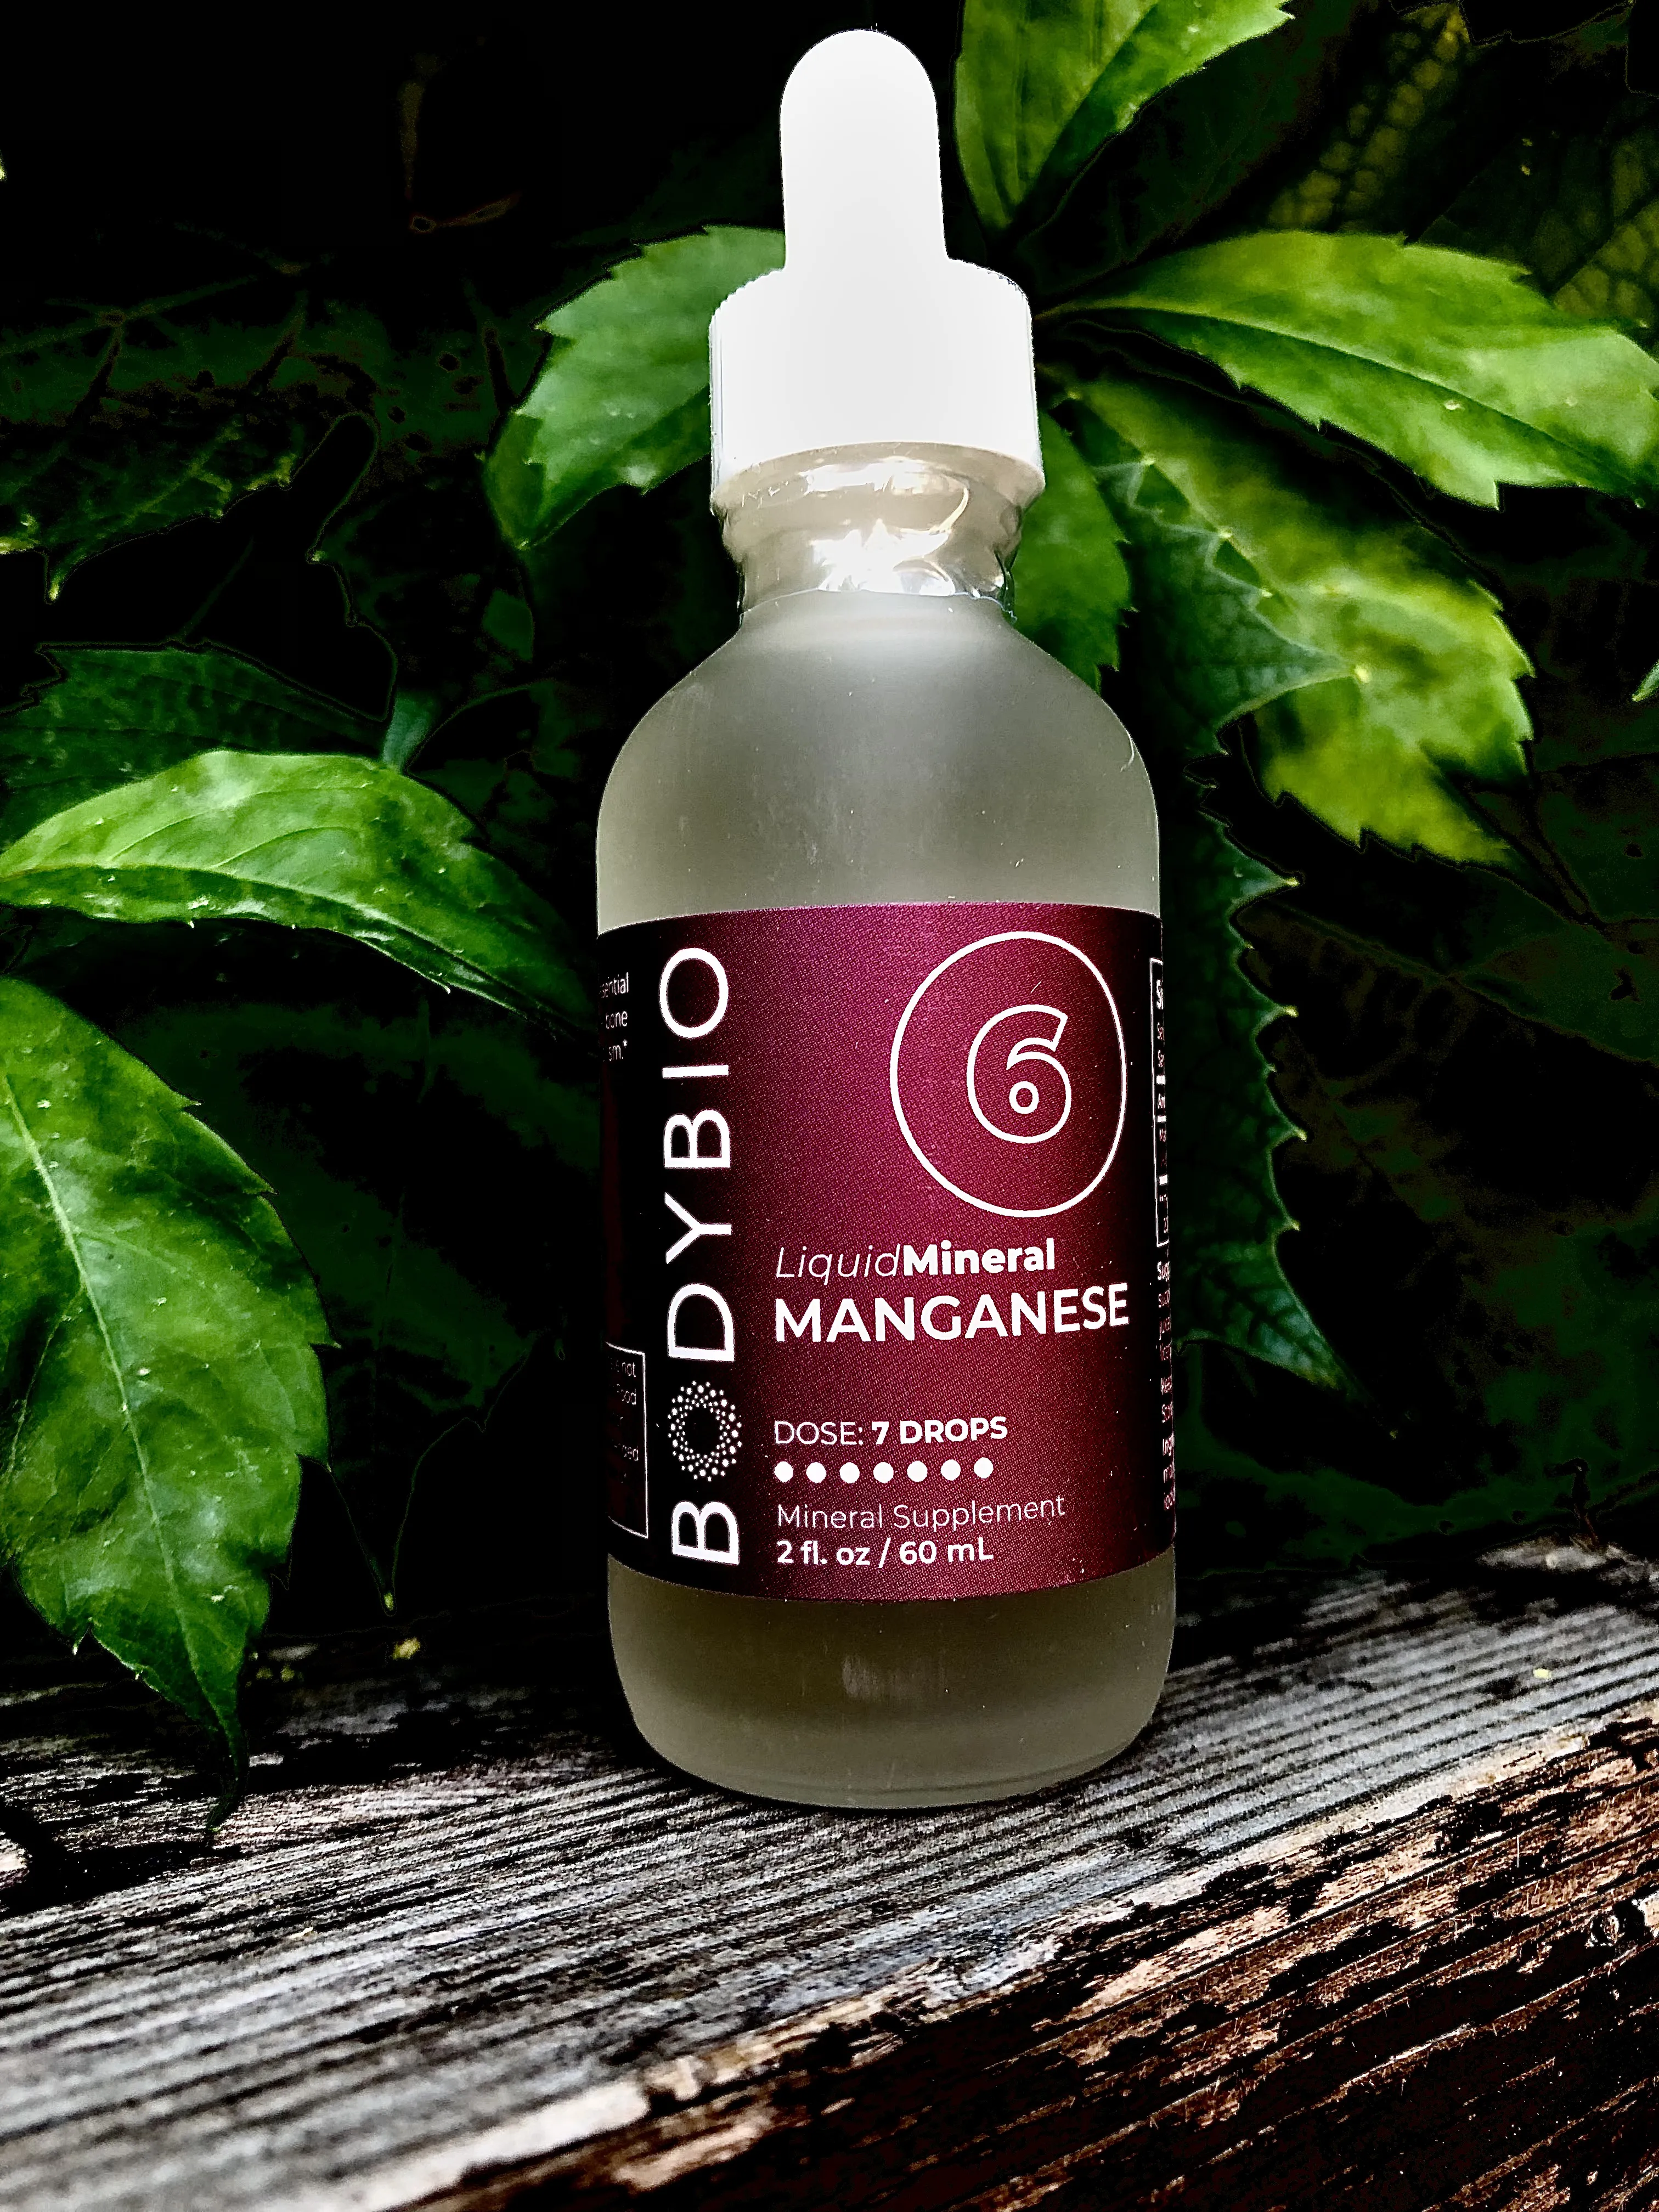 Manganessee mineral drops image bottle 